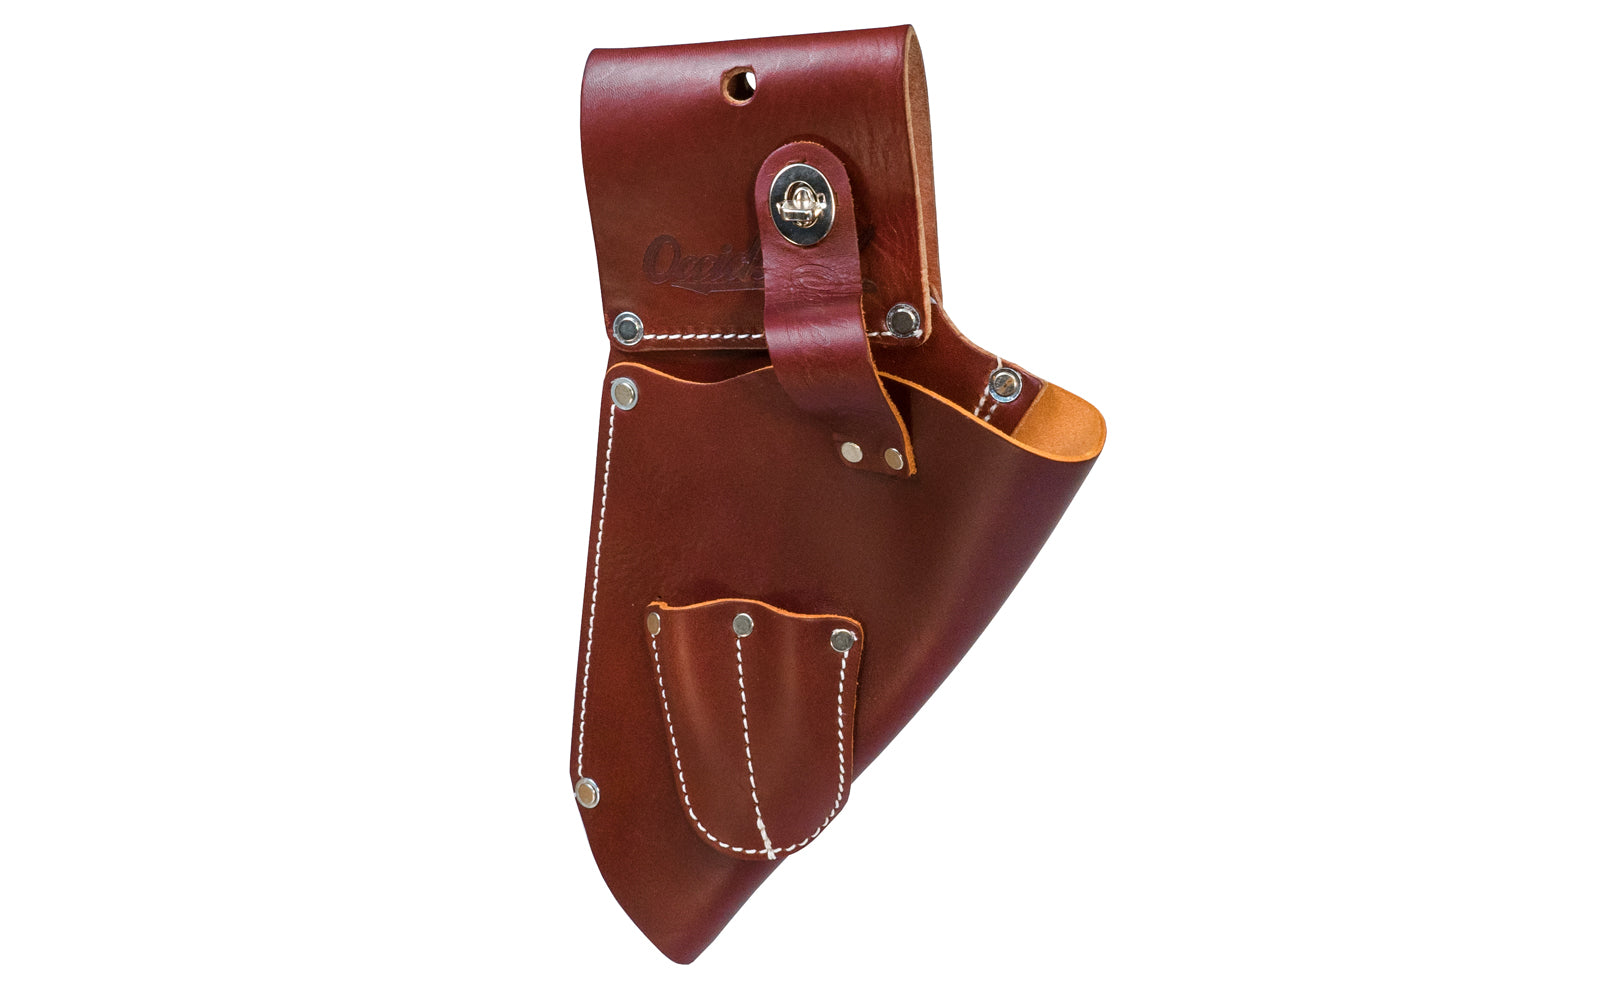 Made in USA - Occidental Leather All leather heavy duty angled body holster for increased balance & comfort with 2 holders for drill or driver bits. Fits most cordless drills. Accepts up to 3" work belt. - Fits up to a 3" work belt - High Quality - Drill Holder - Riveted - Tape Holster - 759244009705 - Leather 